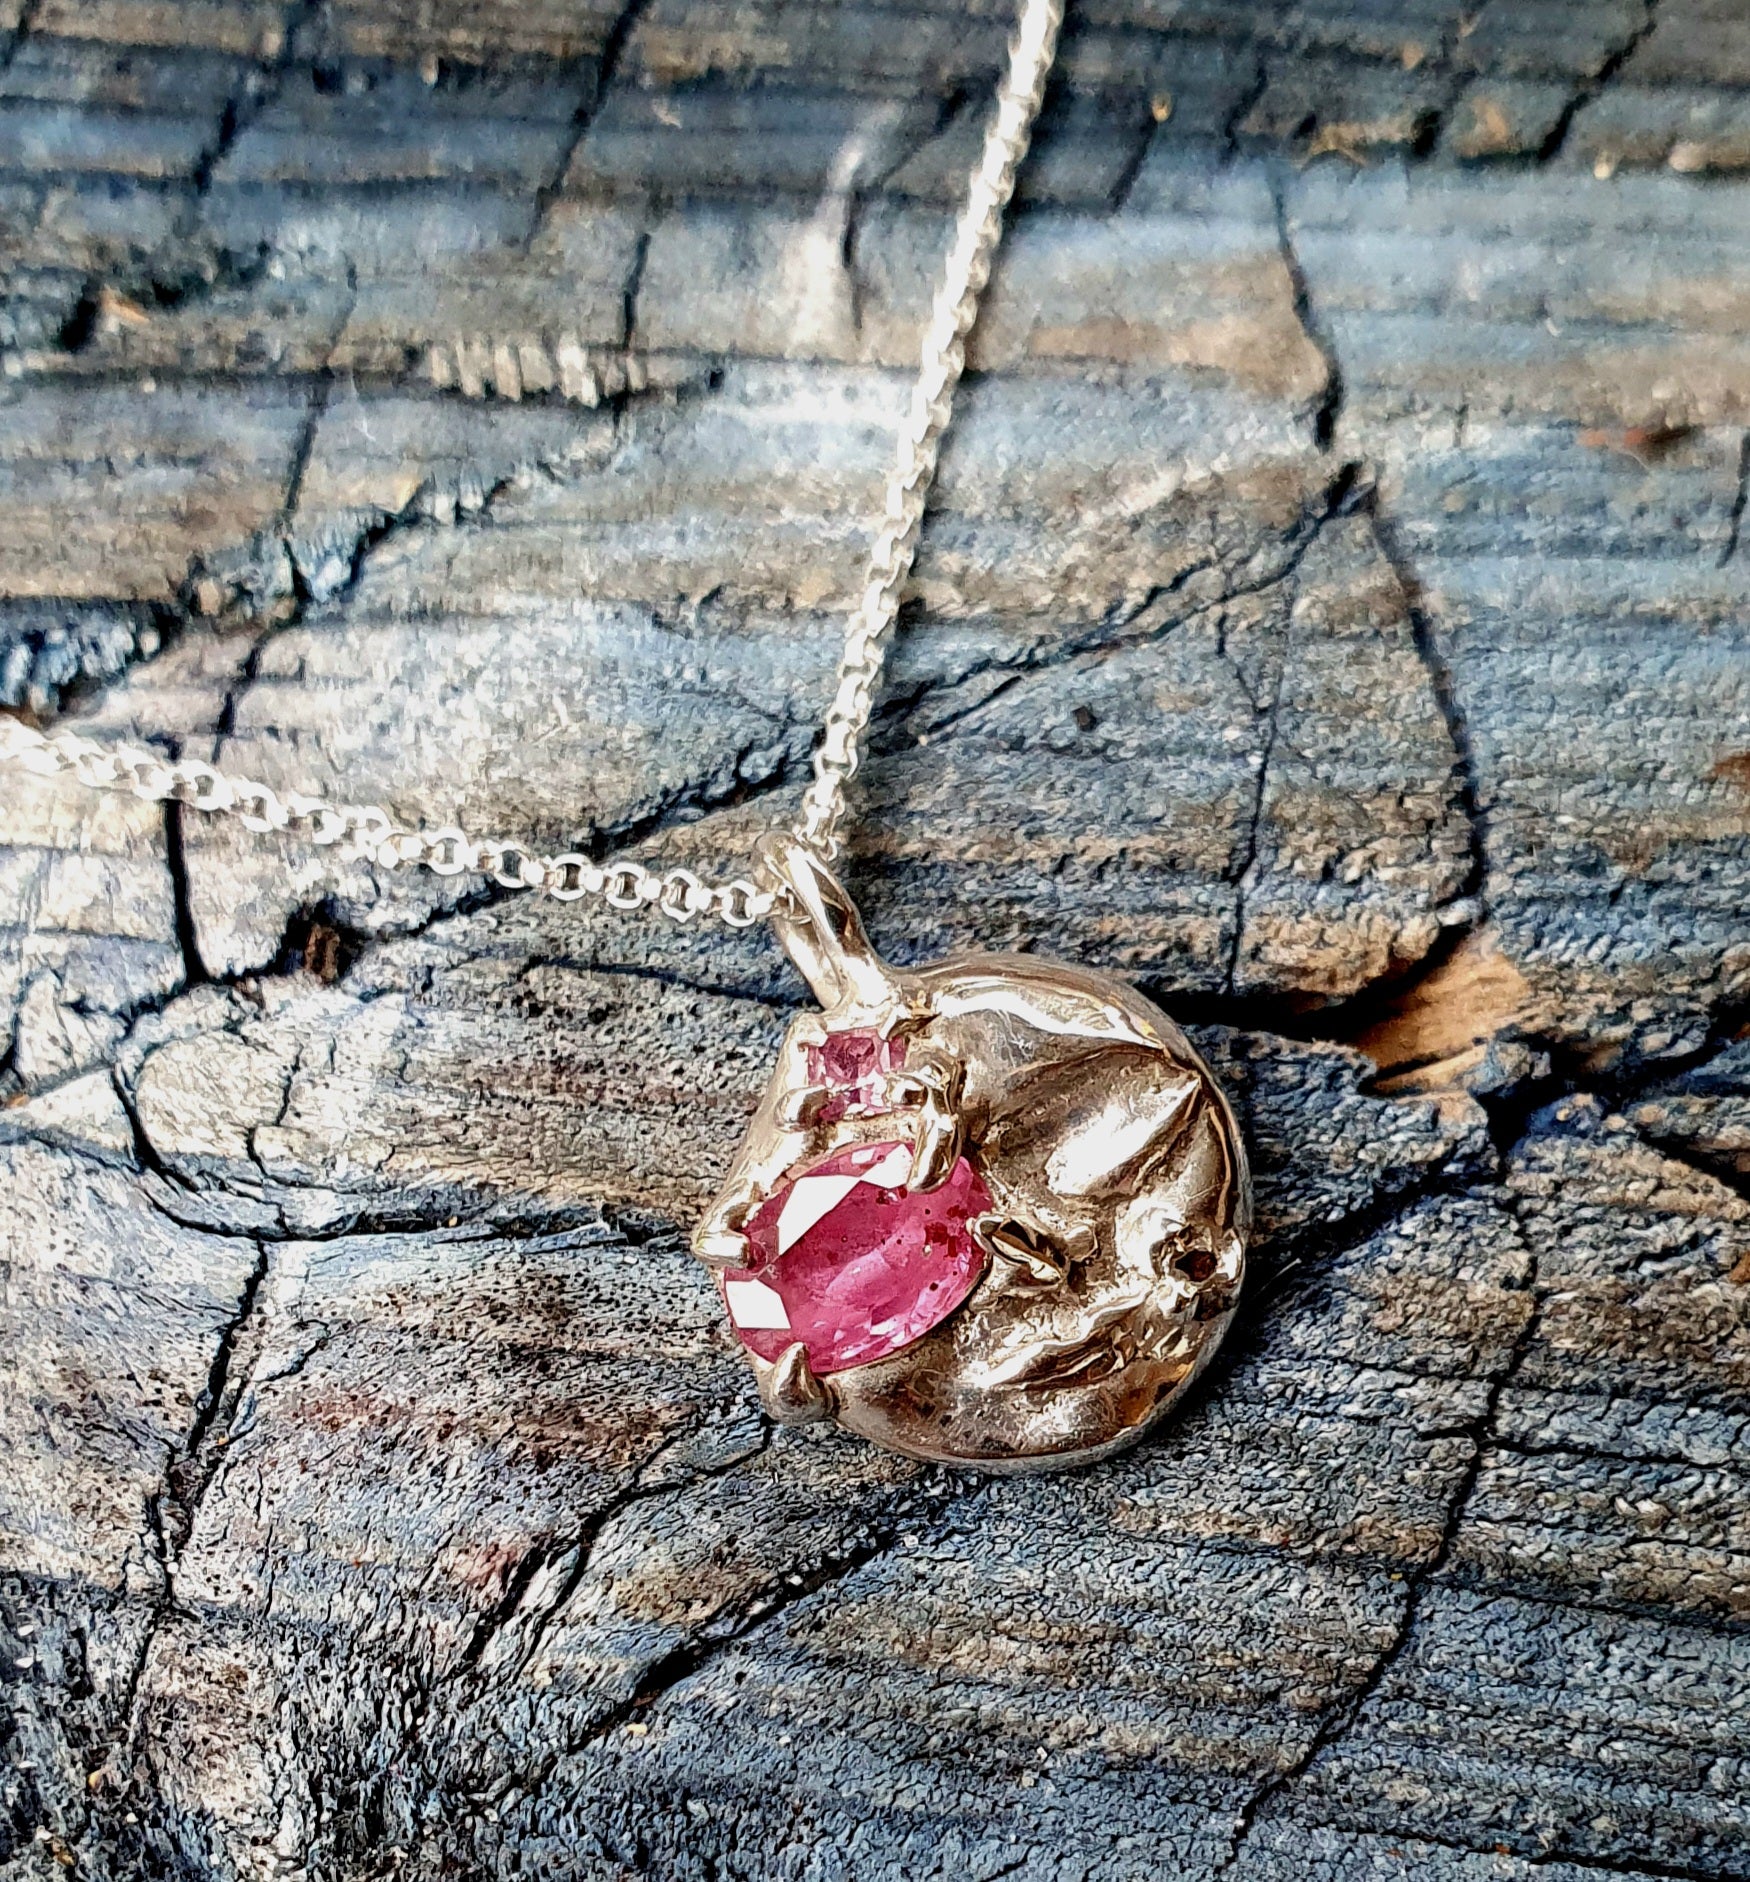 One Eyed Sulis - Sterling silver and pink sapphire